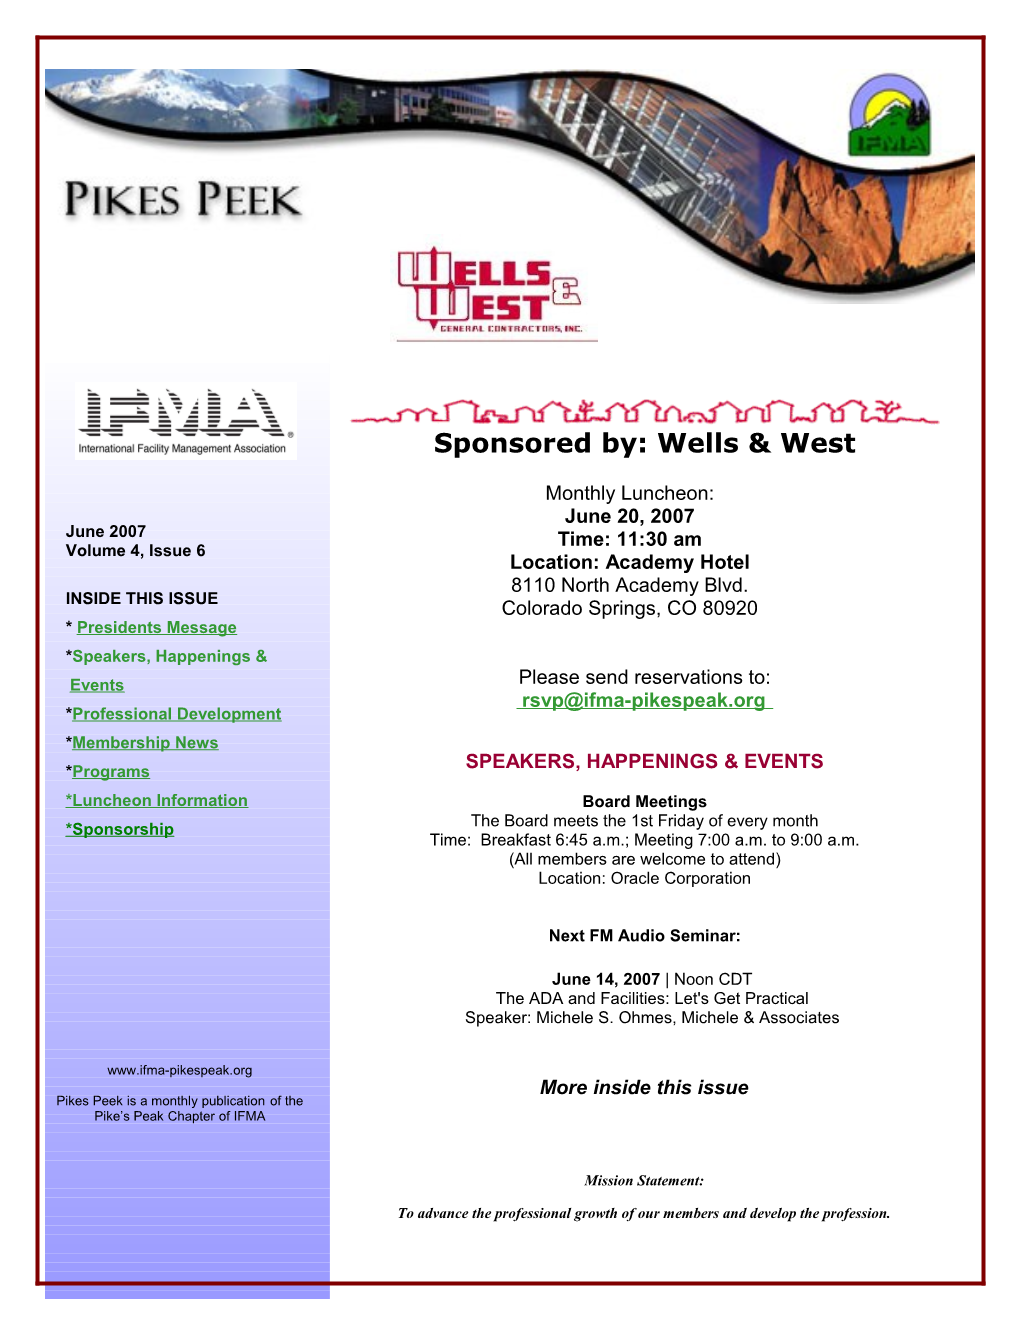 The Pikes Peak Chapter Of IFMA